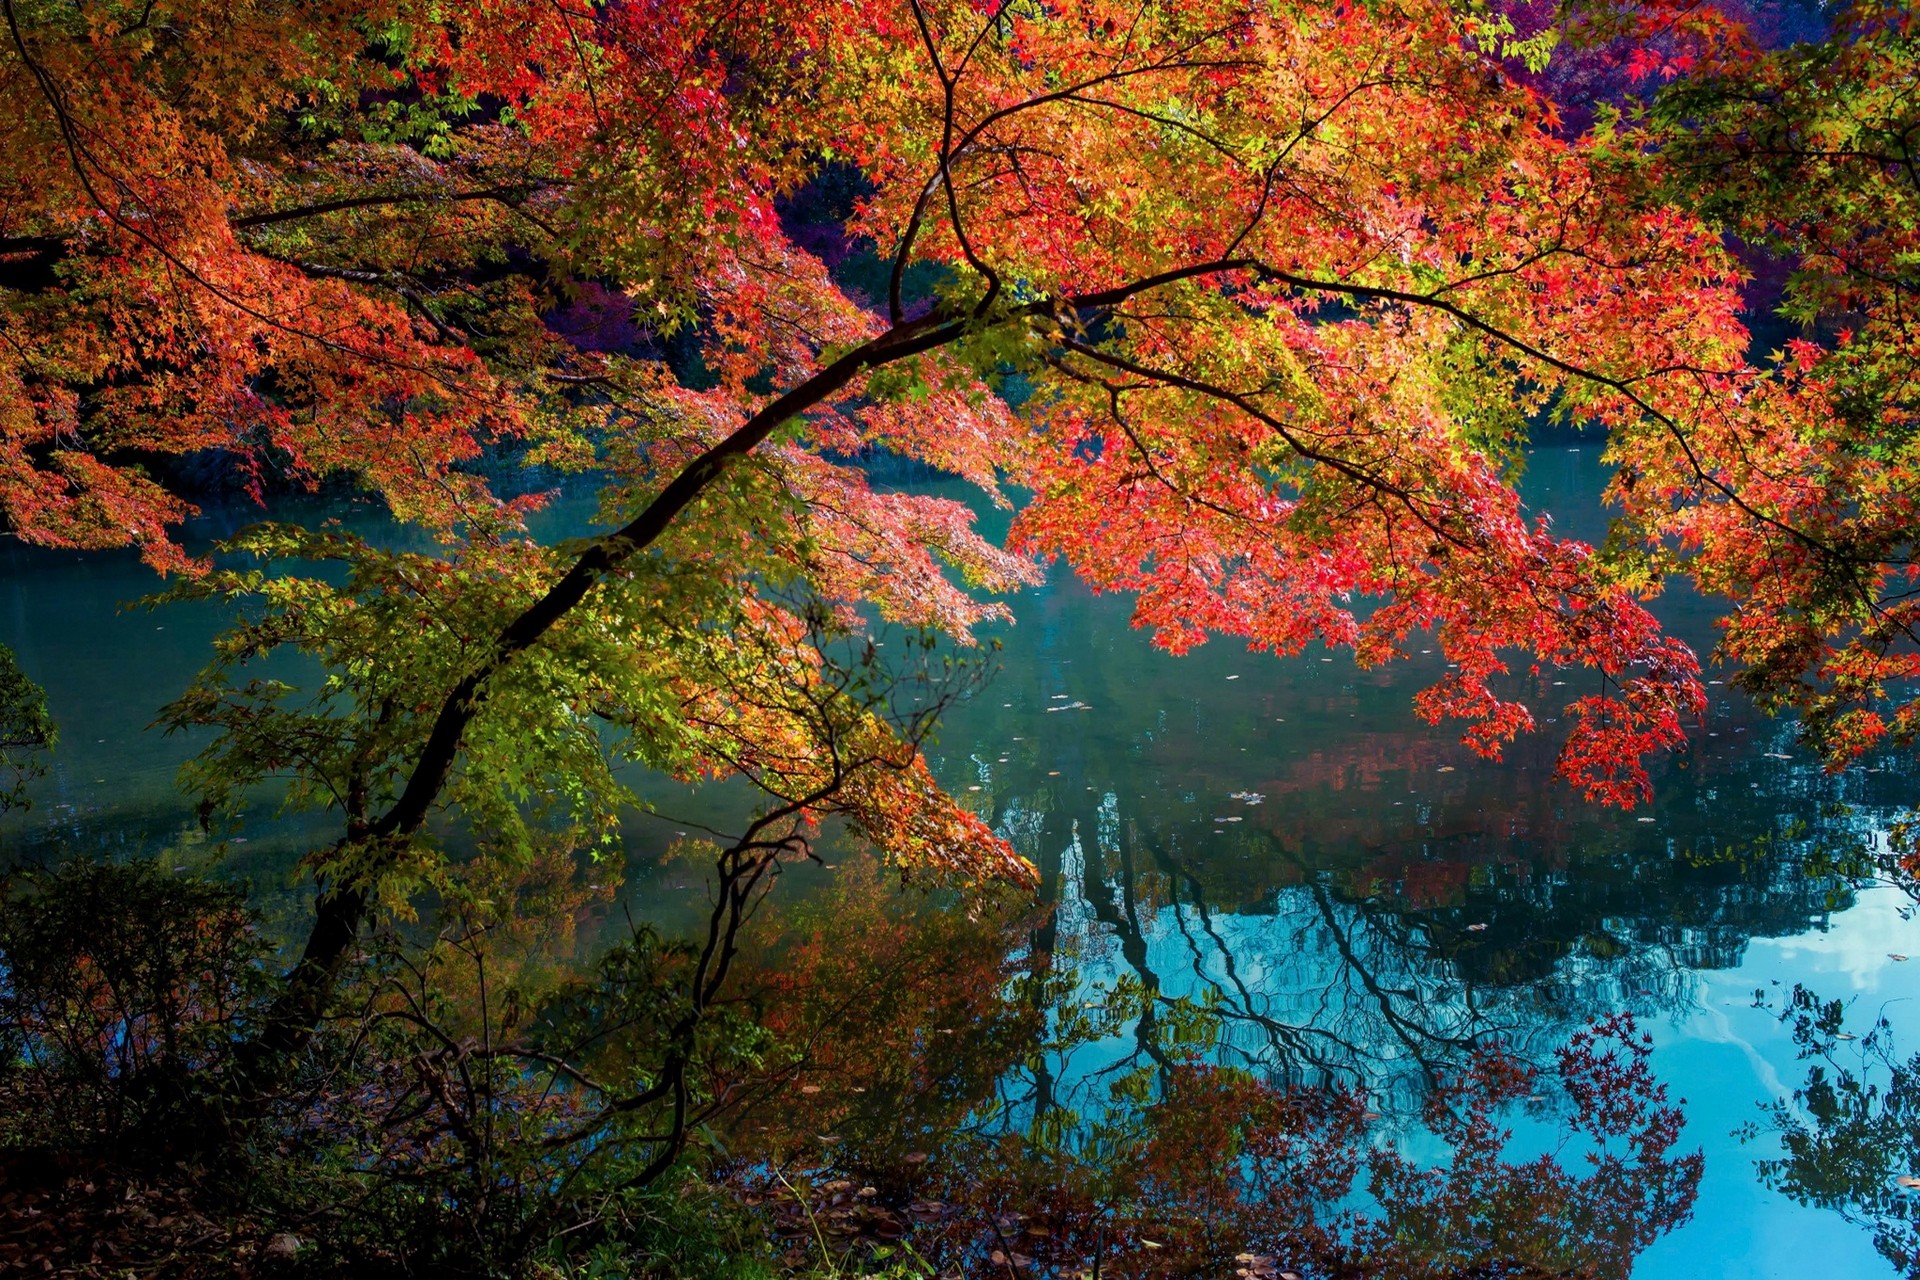 General 1920x1280 nature water turquoise fall trees lake shrubs reflection daylight colorful